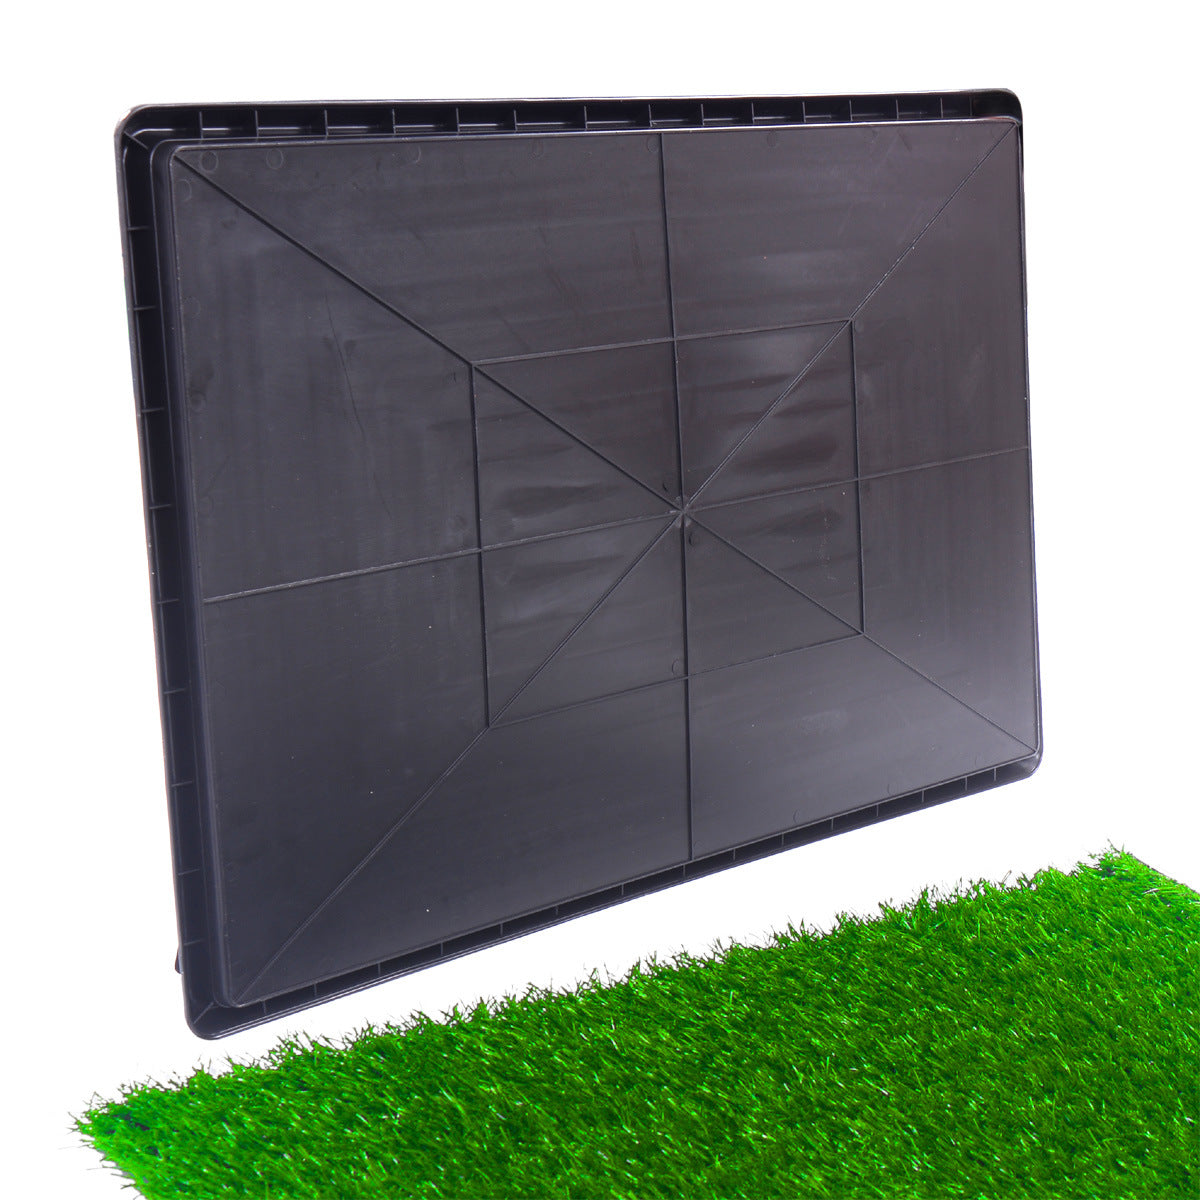 Pet Toilet, Puppy Dog Pet Potty Training Pee, Artificial Grass Pad with Tray (30’’X20’’), Replacement Dogs Turf Potty Training for Indoor Apartment